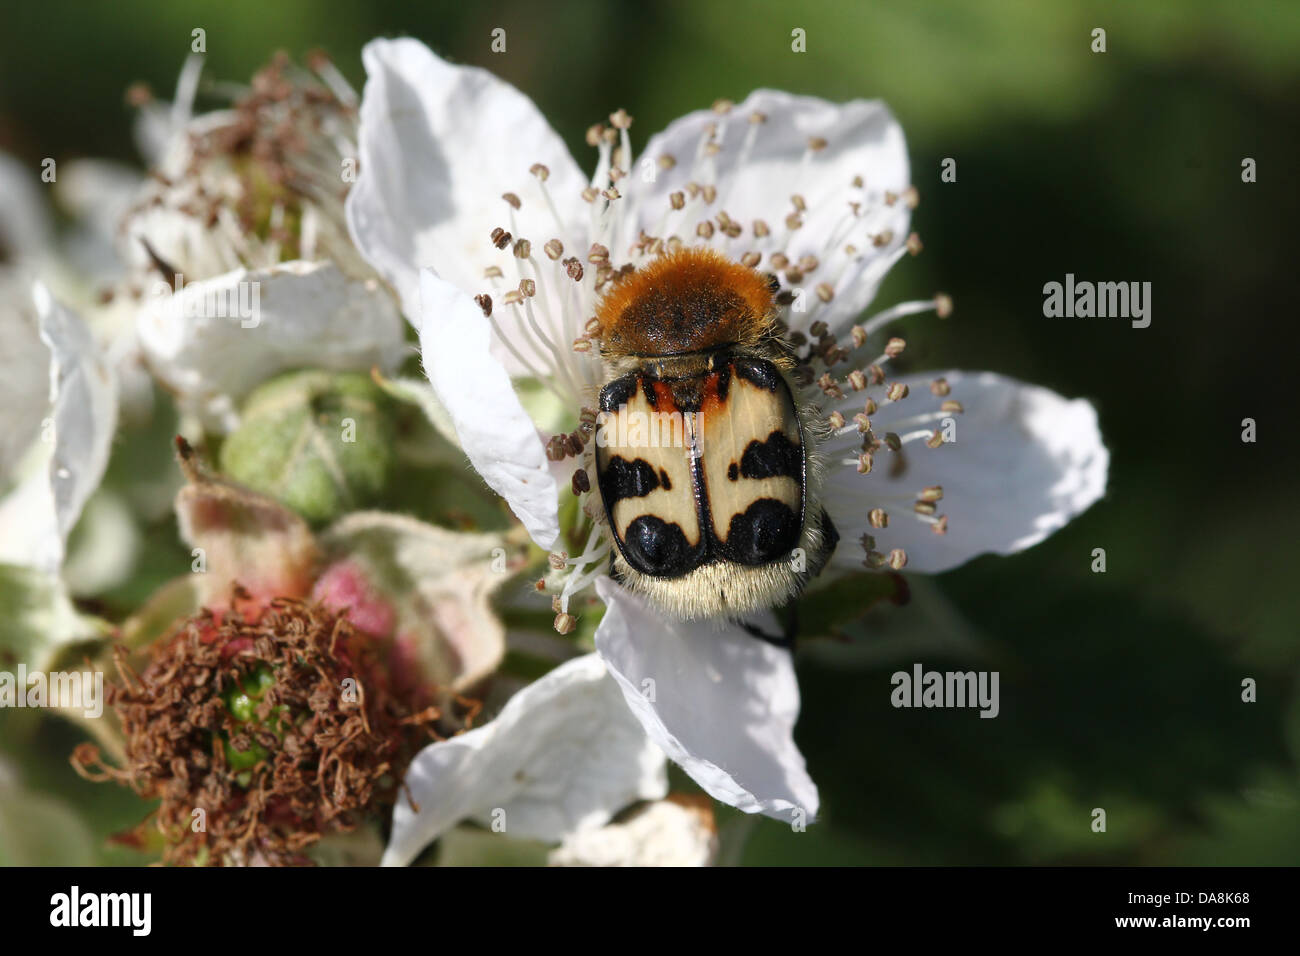 Close-up of  a Bee Beetle (Trichius zonatus or T. fasciatus) feeding on blackberry flowers - over 30 images in series Stock Photo